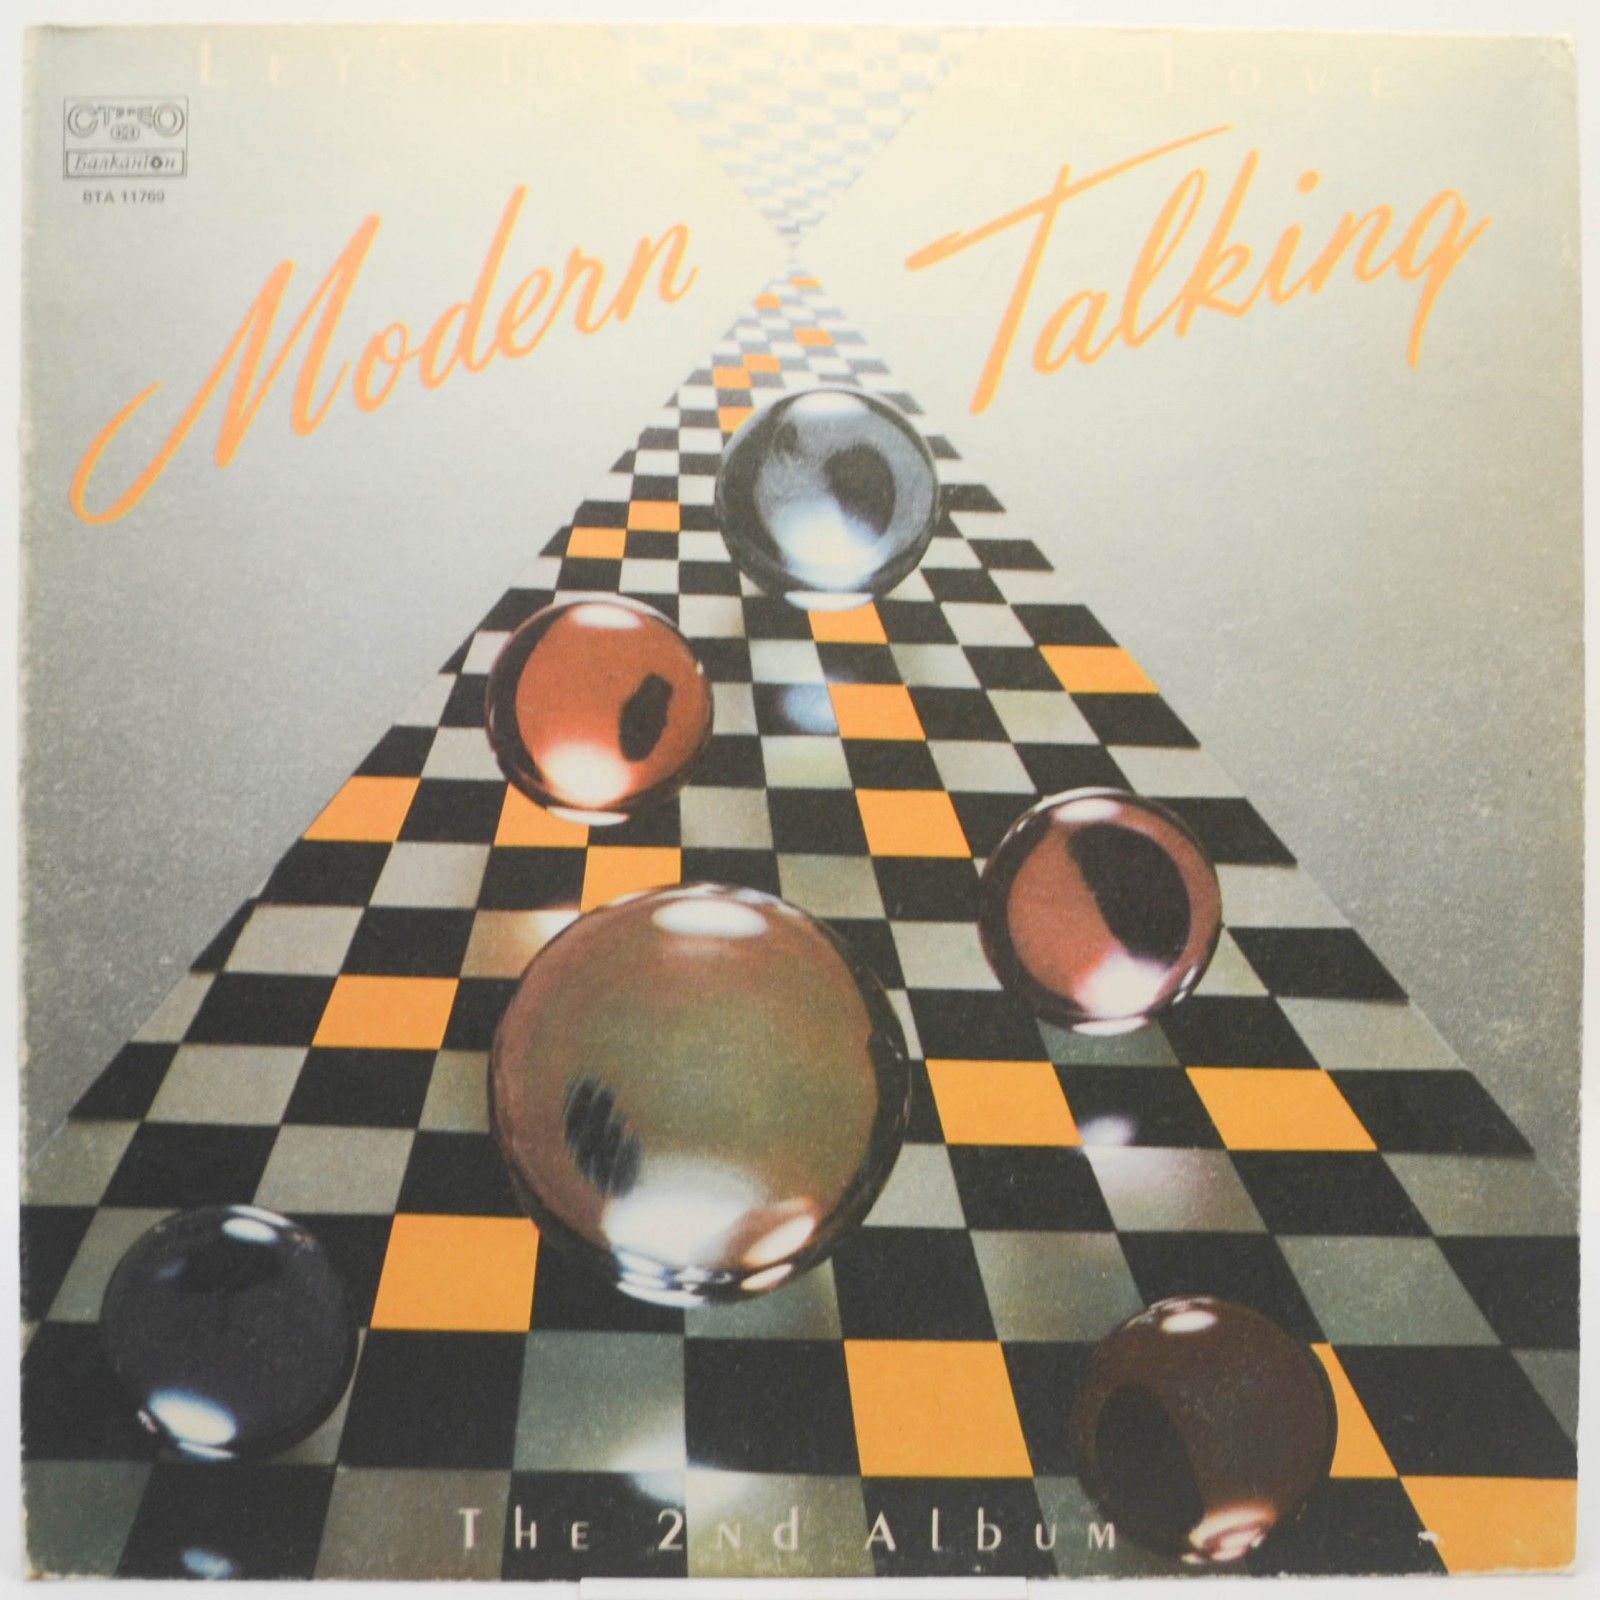 Modern Talking — Let's Talk About Love - The 2nd Album, 1986